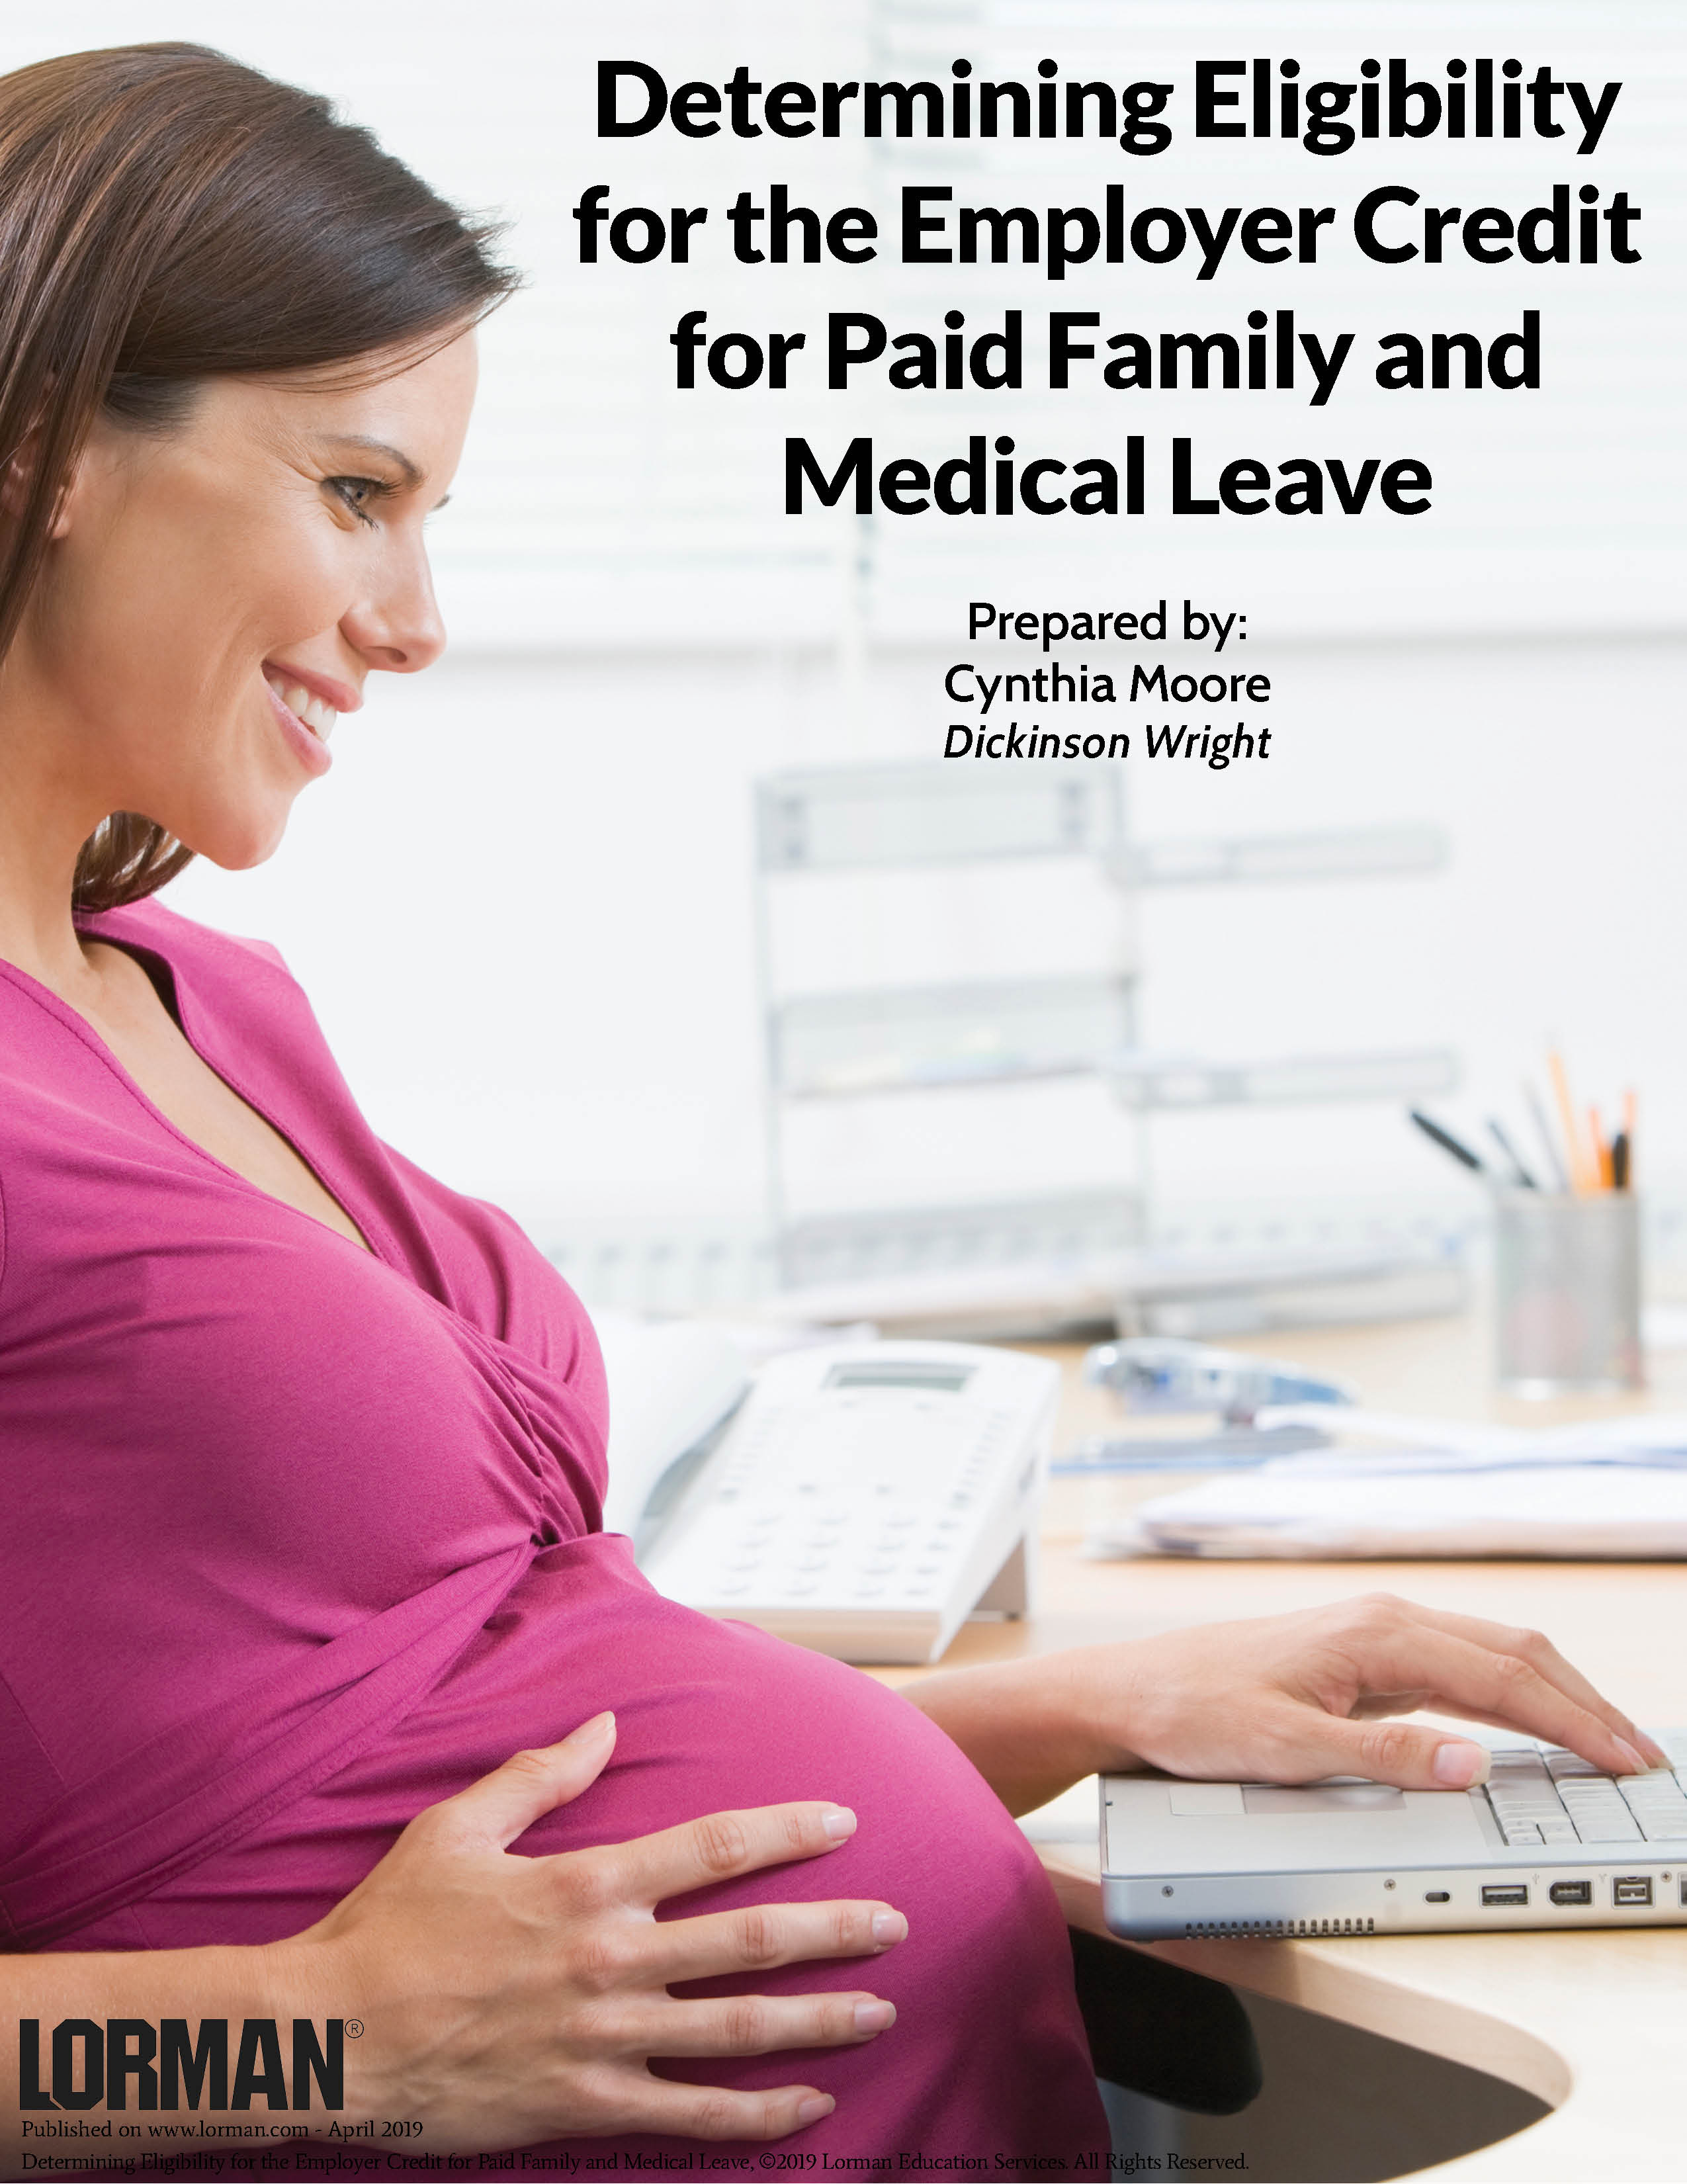 Determining Eligibility for the Employer Credit for Paid Family and Medical Leave